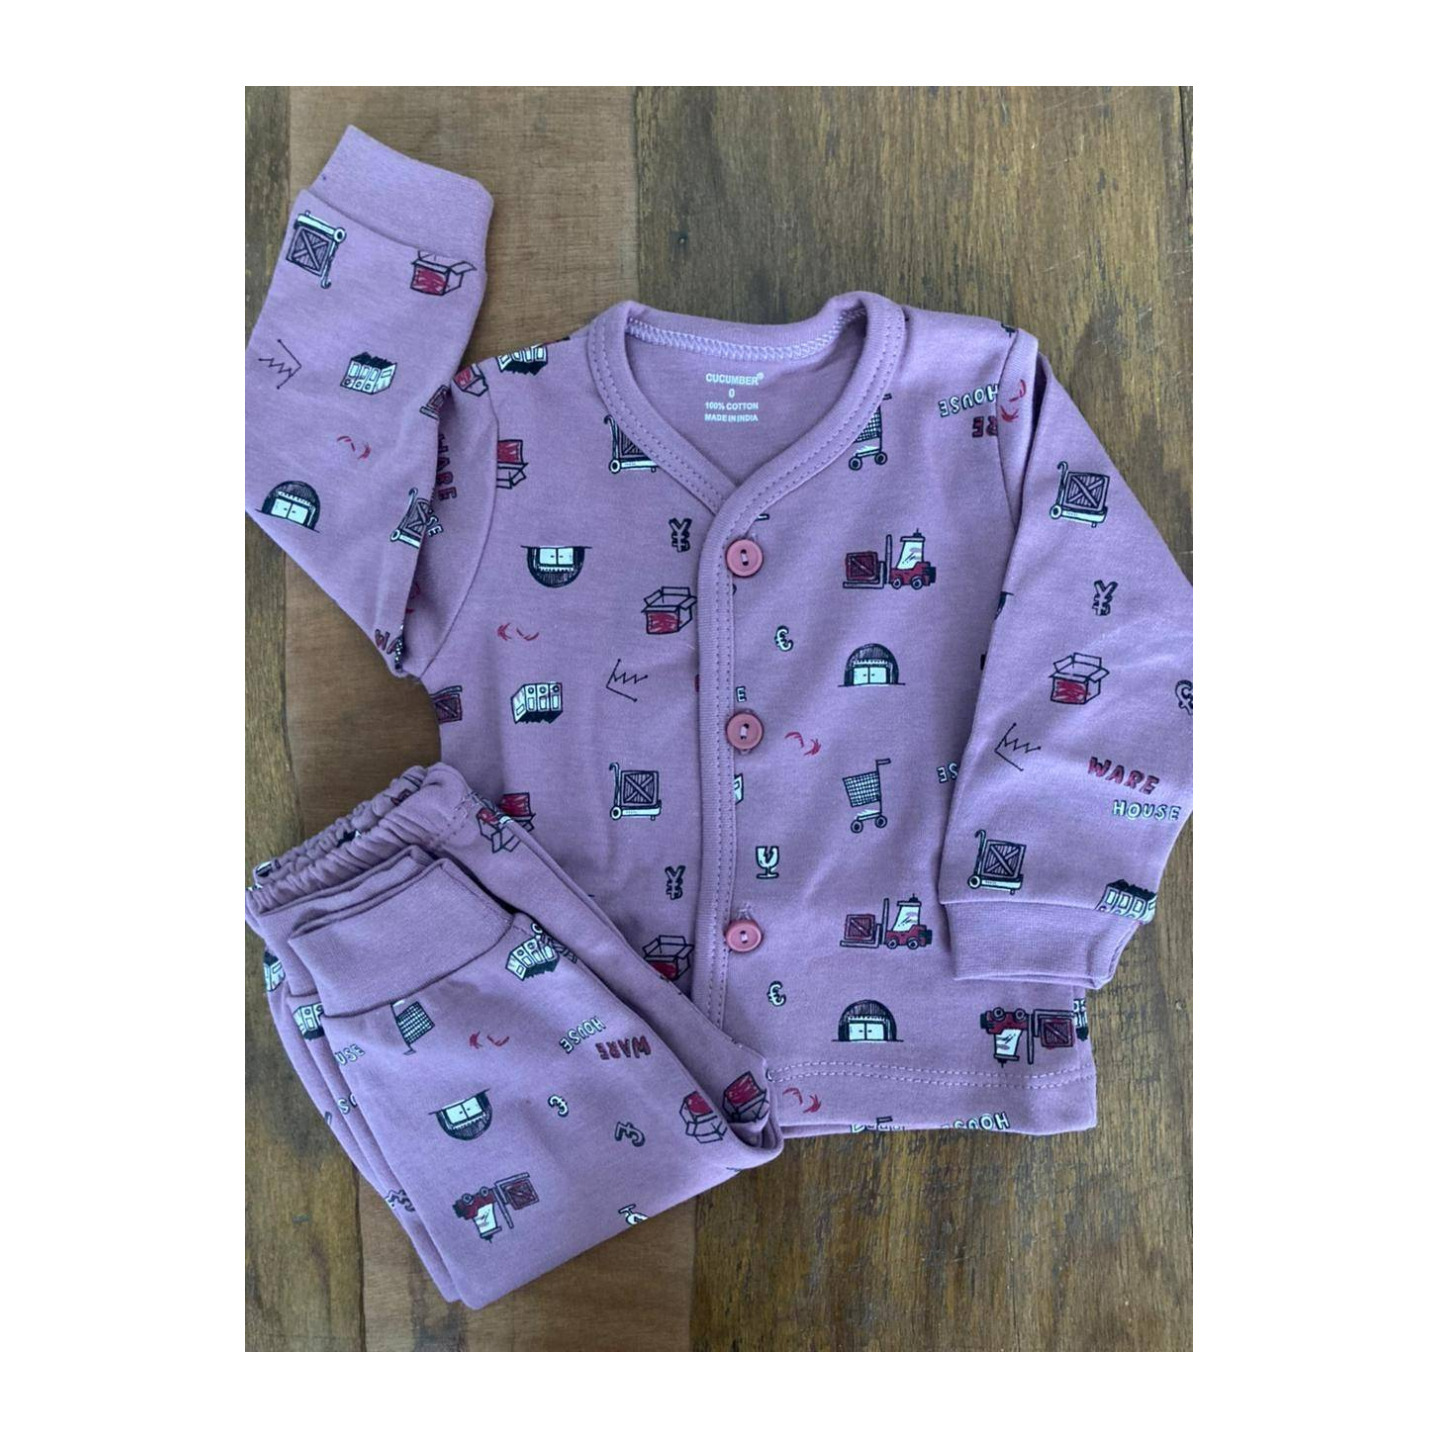 Cucumber Full Sleeves Pyjama Set Rs 270 Made In India New Born Size